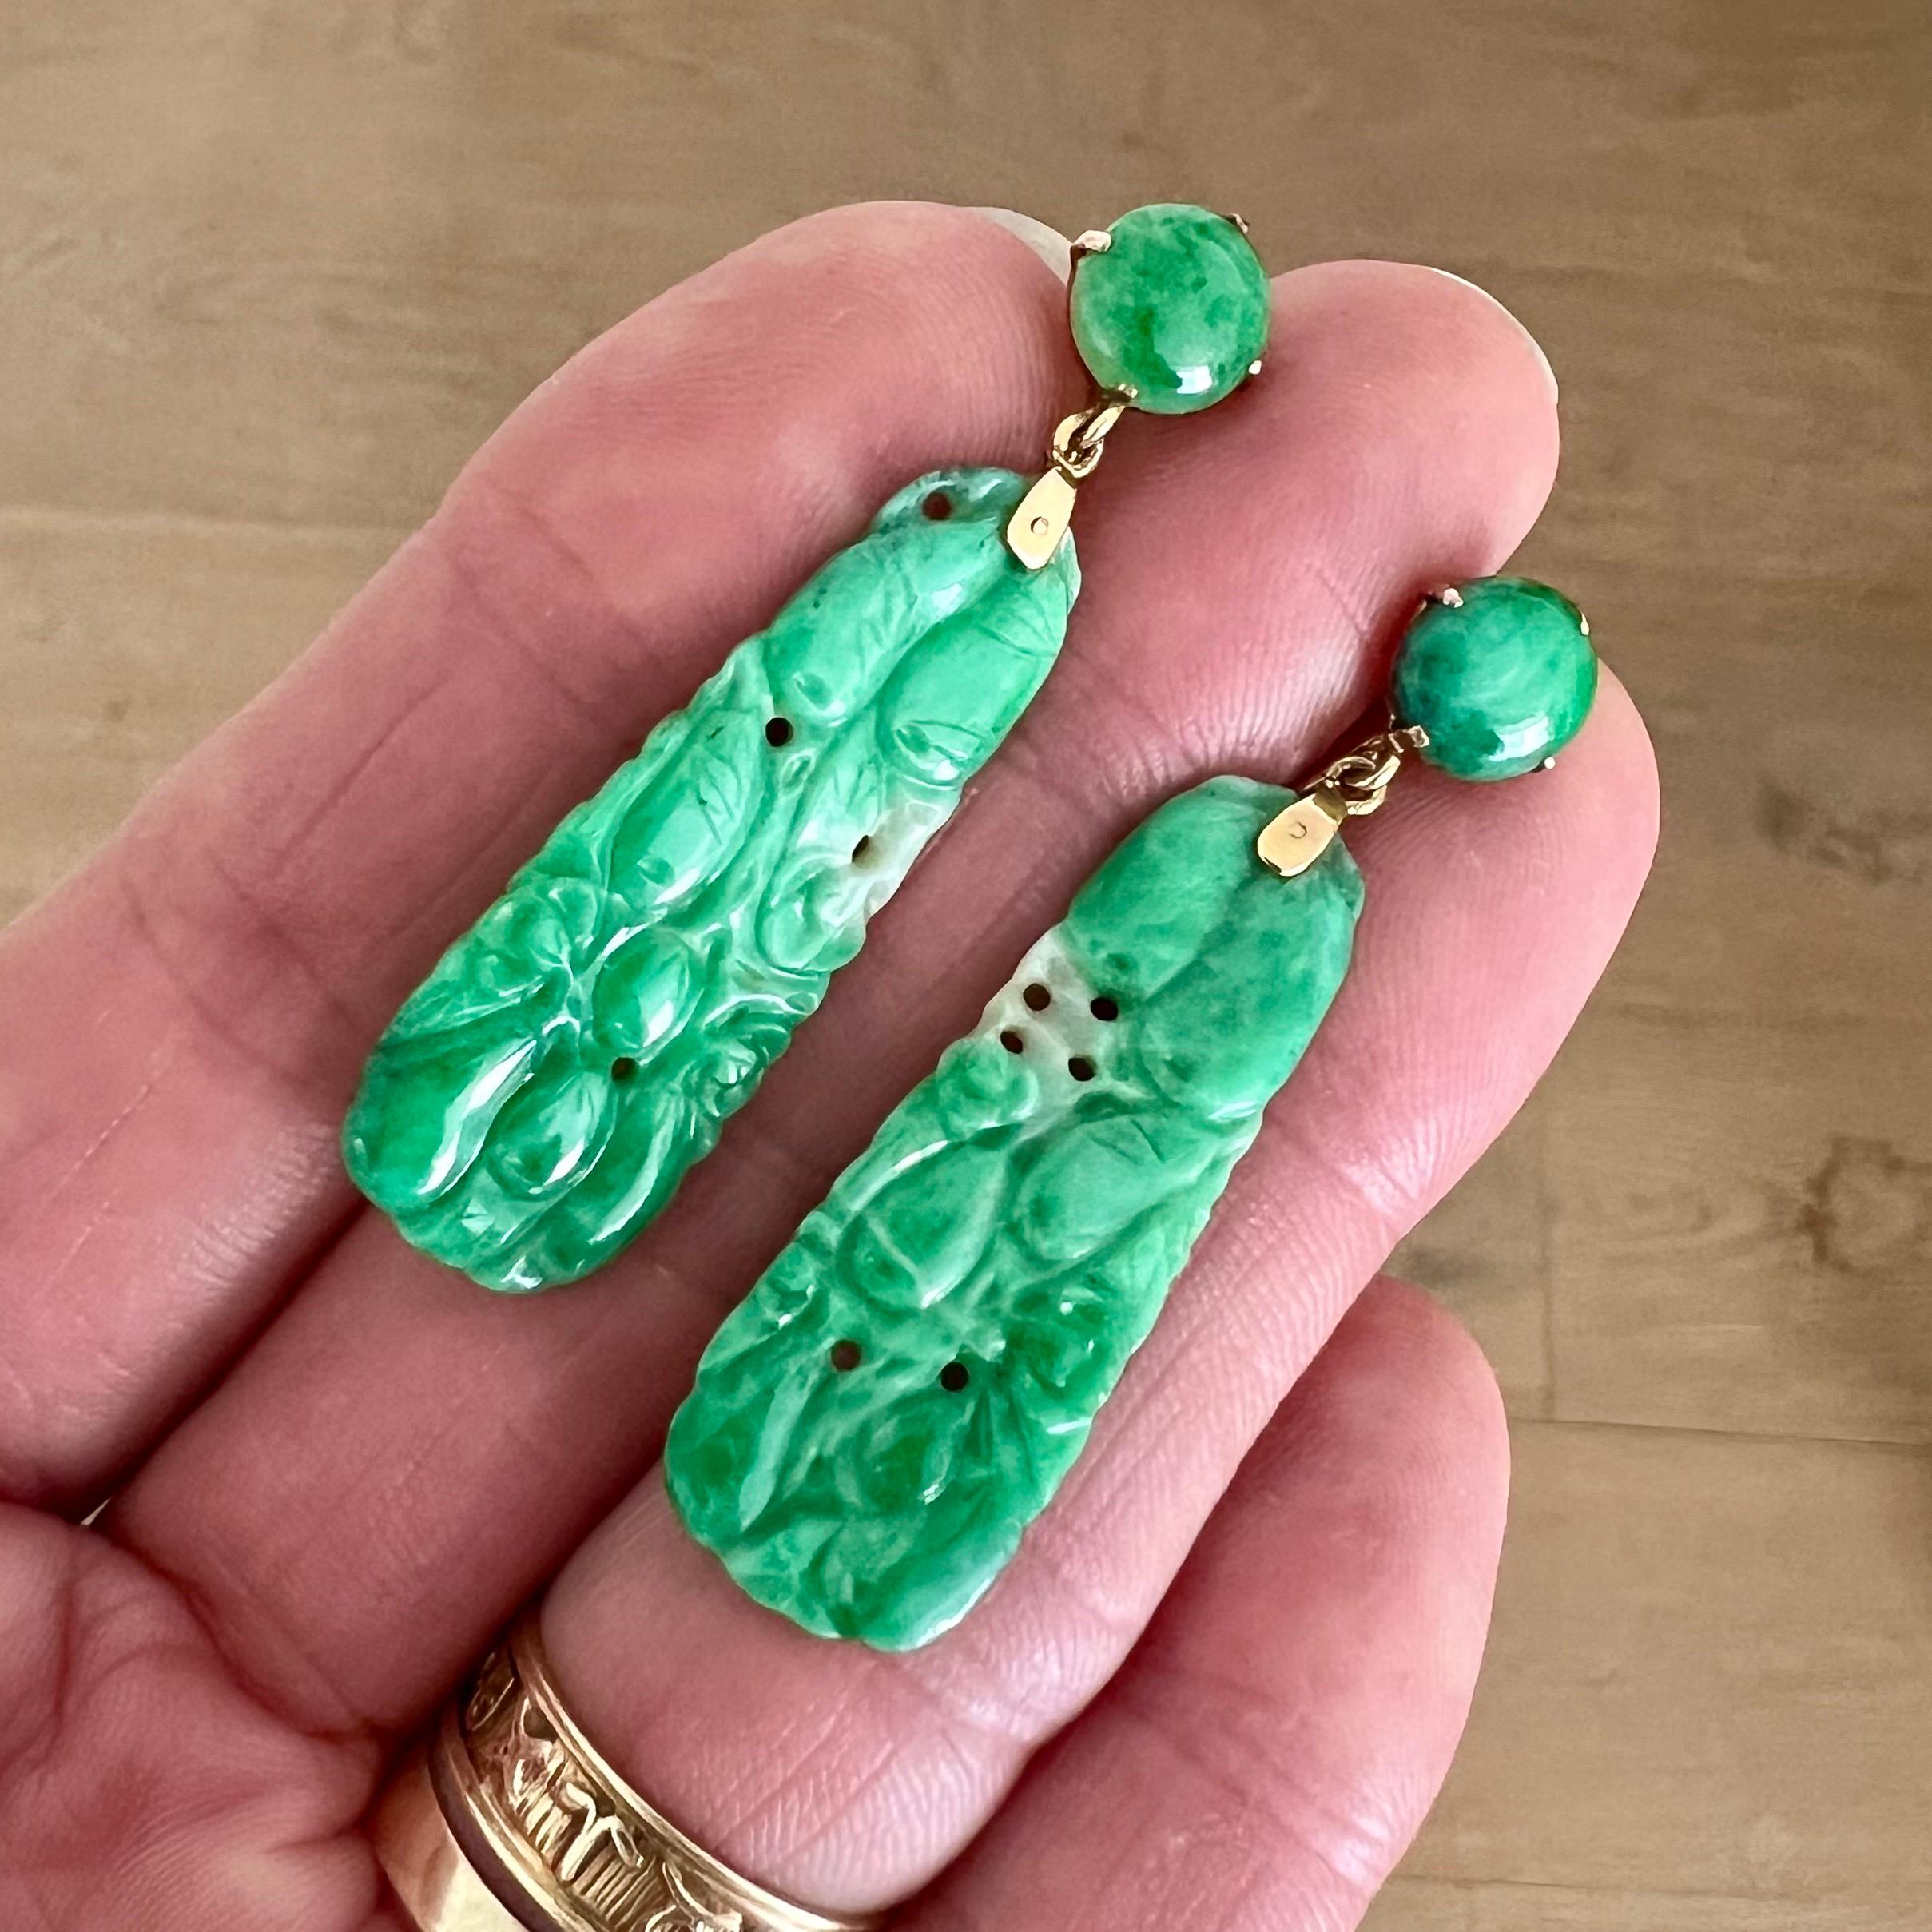 These gorgeous carved jade earrings are certified as untreated. The jade earrings are made in 14 karat gold with carved green and white mottled jade panels. The natural jadeite jade panel earrings are hung on a small gold hook. Each earring is